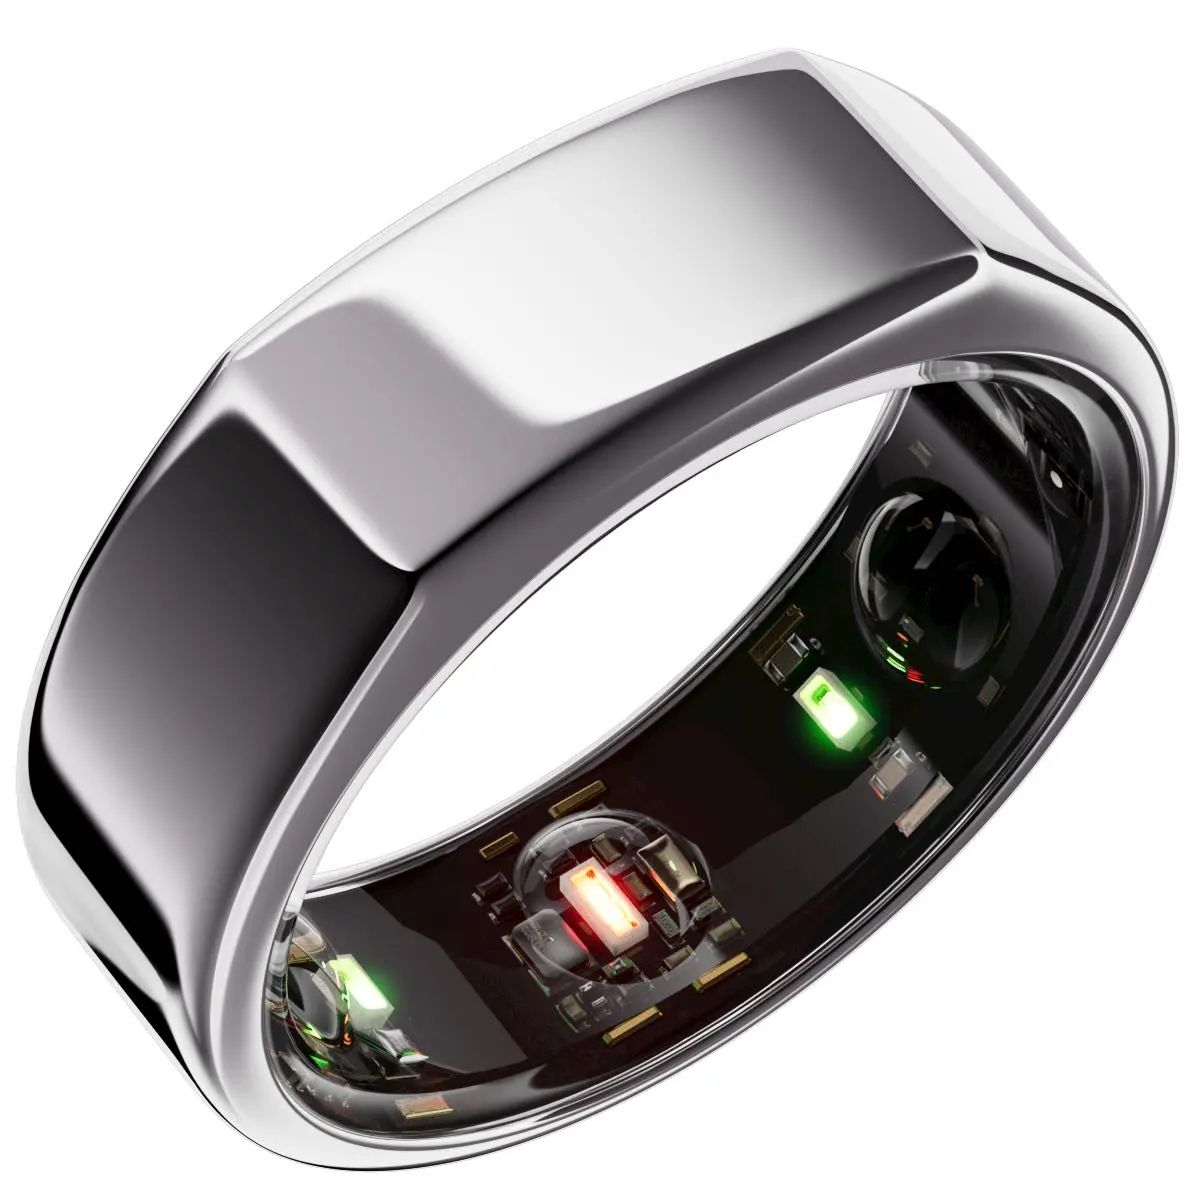 Oura Ring 3 on a white background